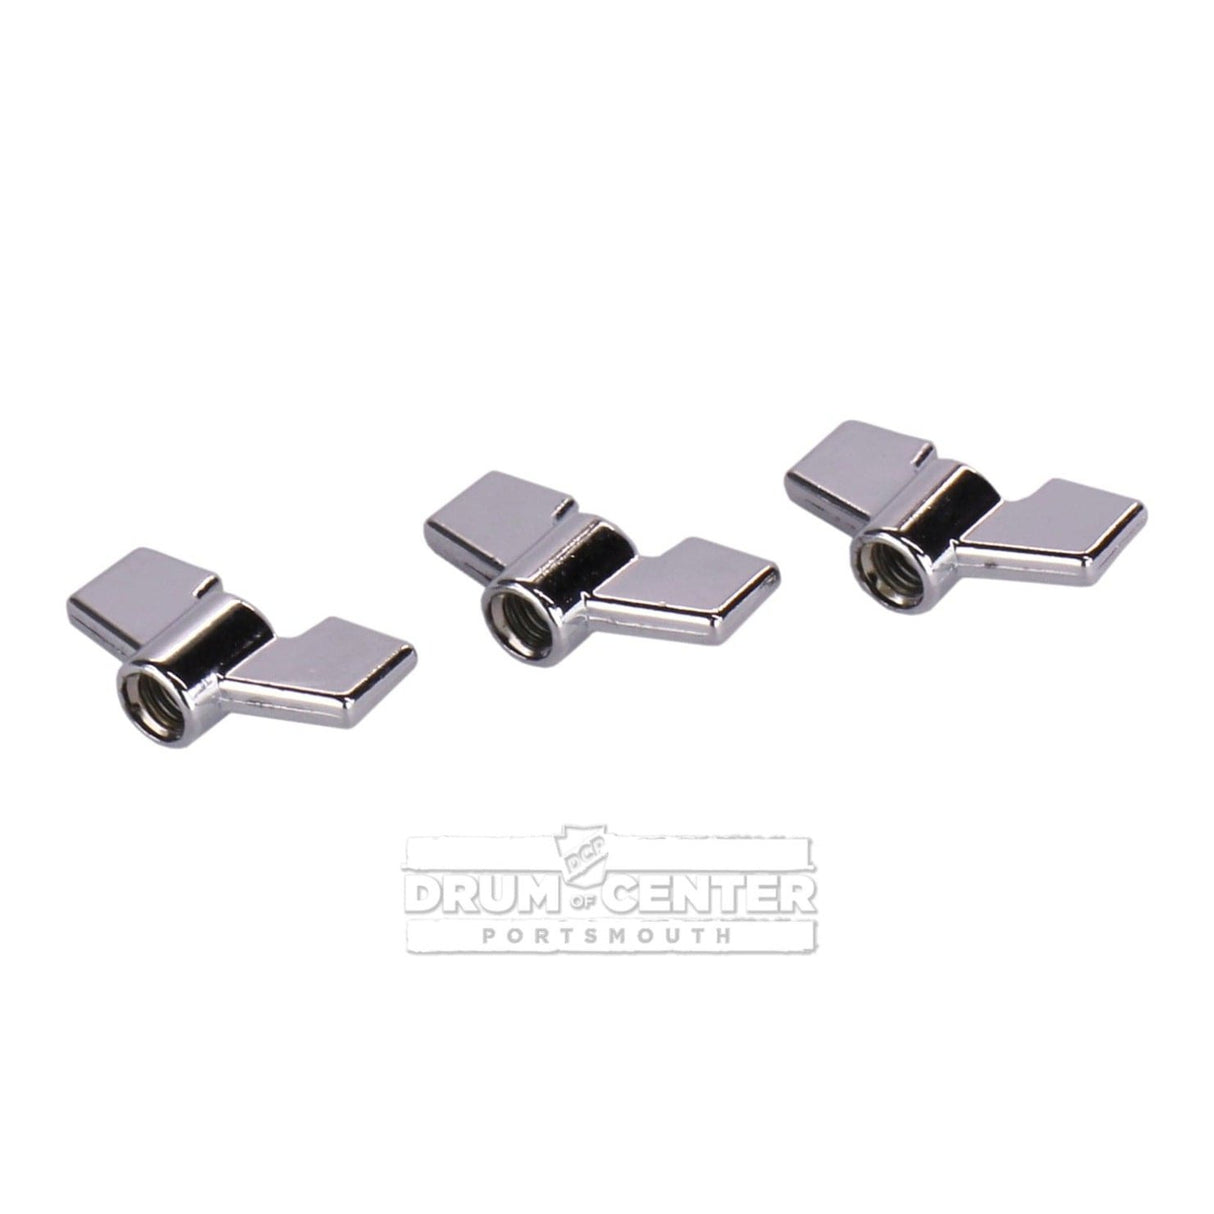 Danmar Wing Nut Topper for Cymbal Stand Chrome 3pack